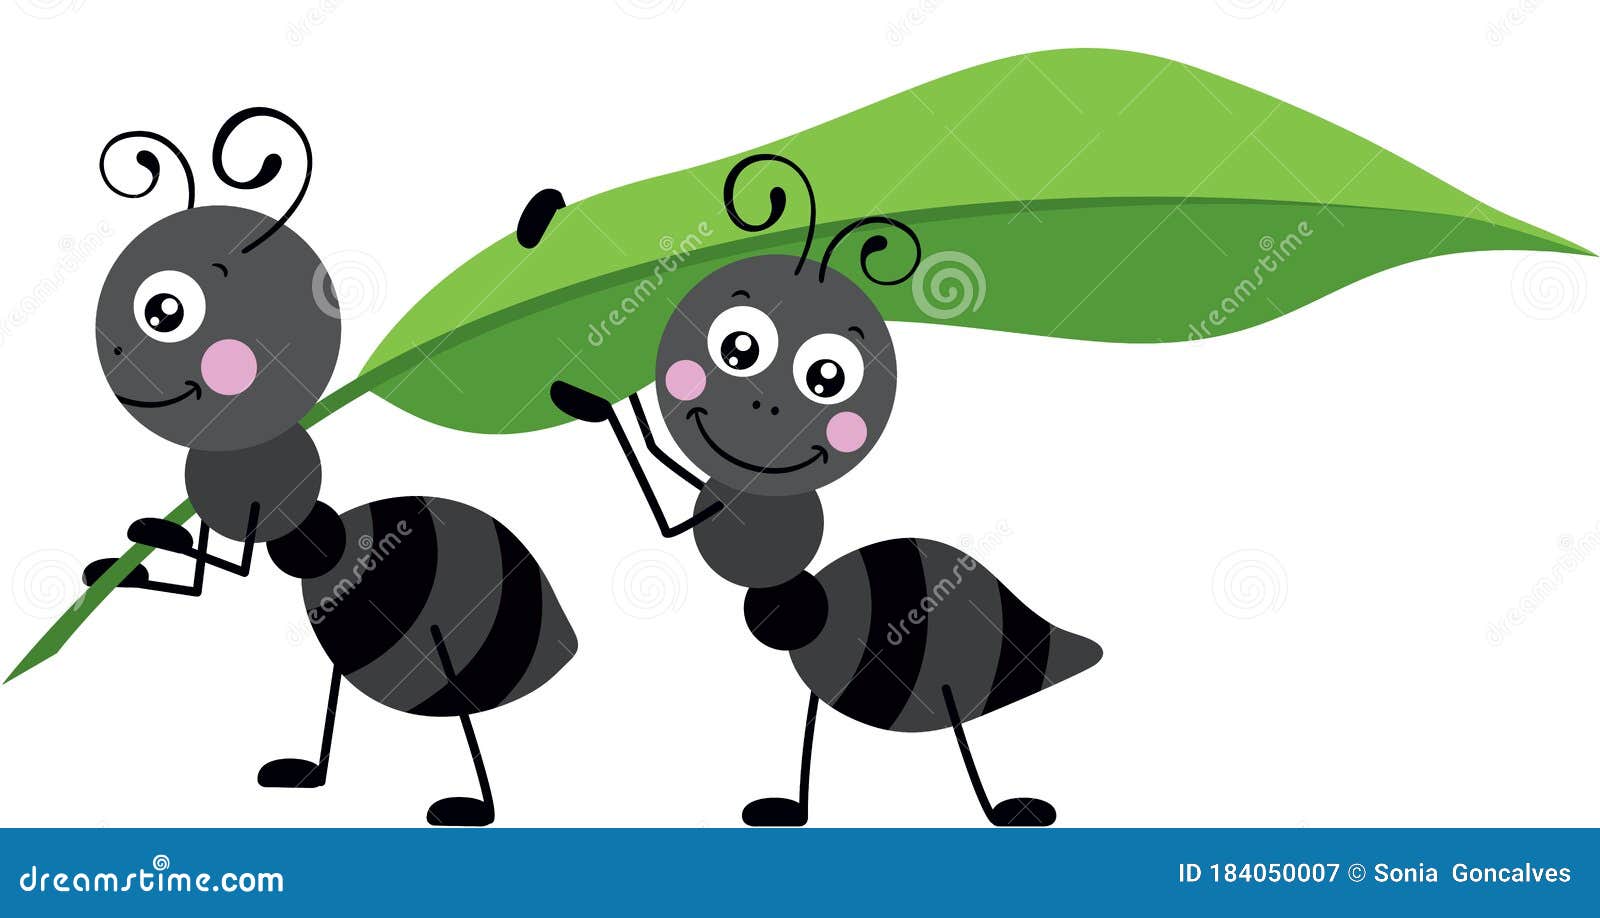 Two Ants Carrying a Green Leaf Stock Vector - Illustration of cartoon,  scrapbook: 184050007